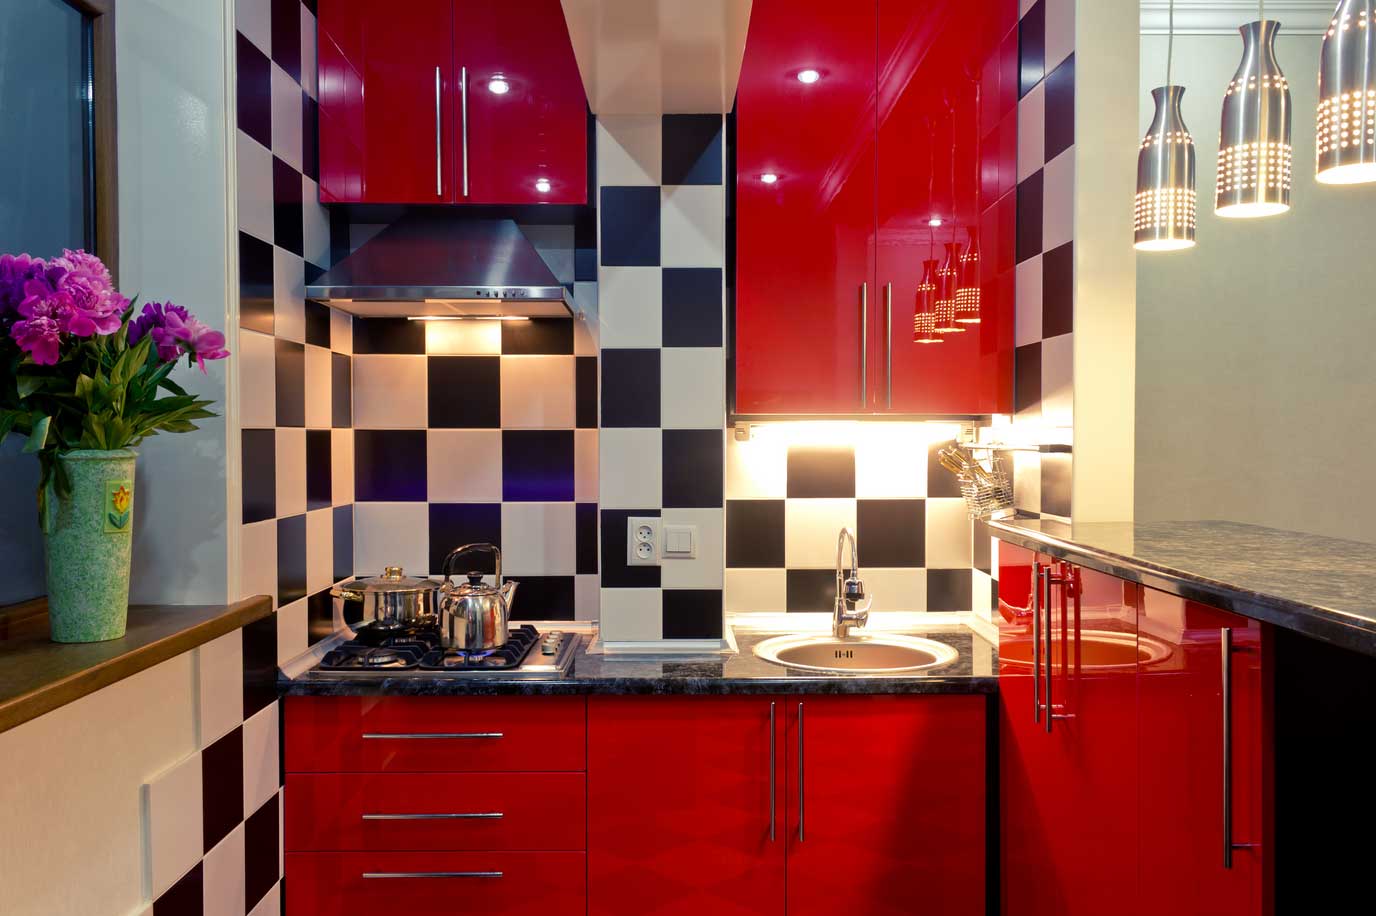 A small kitchen with black and white tile and red cabinets.